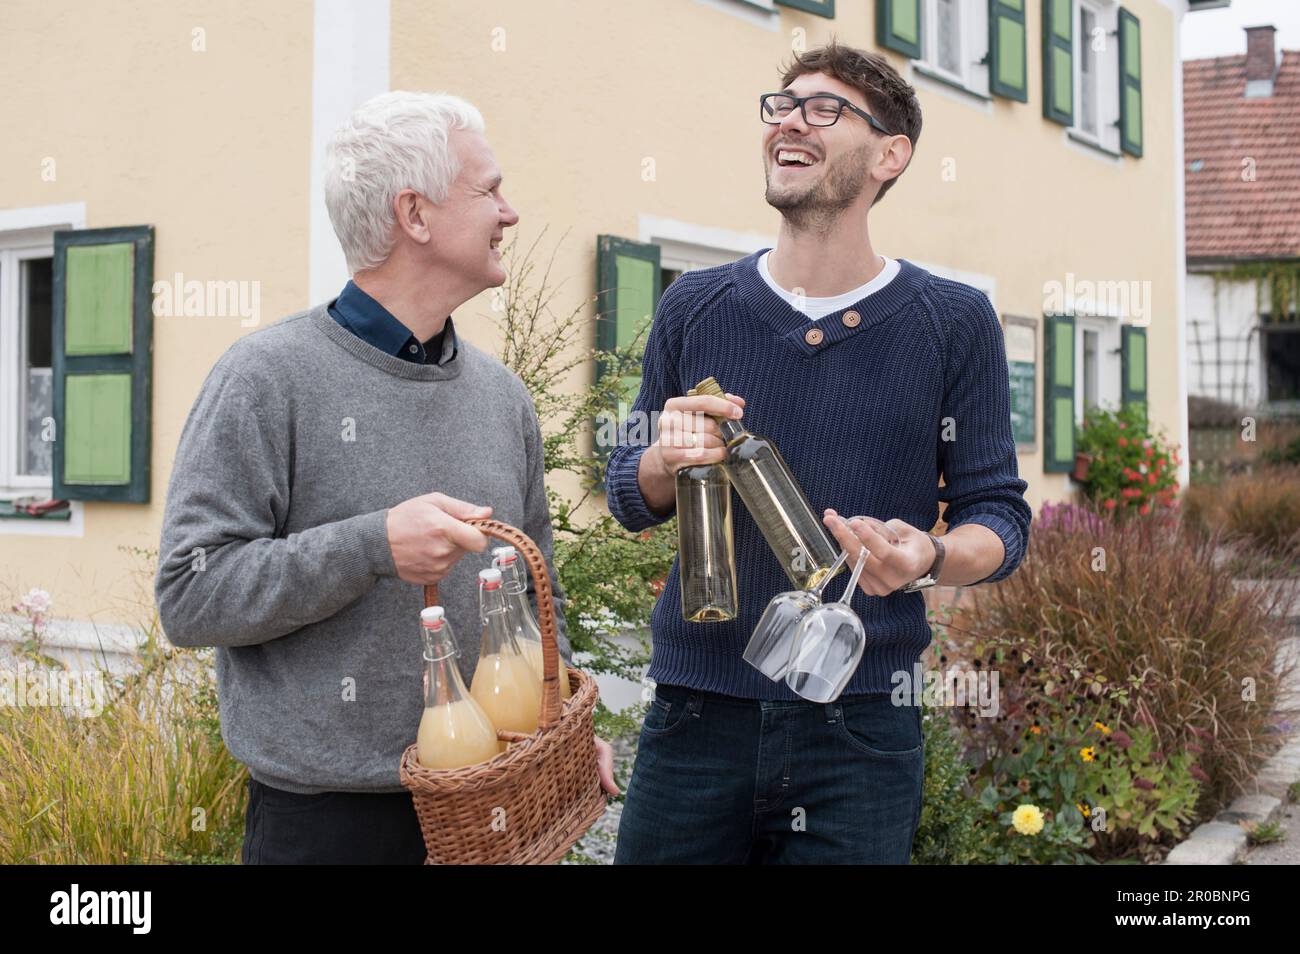 Father and son holding bottles of white wine and apple juices and laughing, Bavaria, Germany Stock Photo